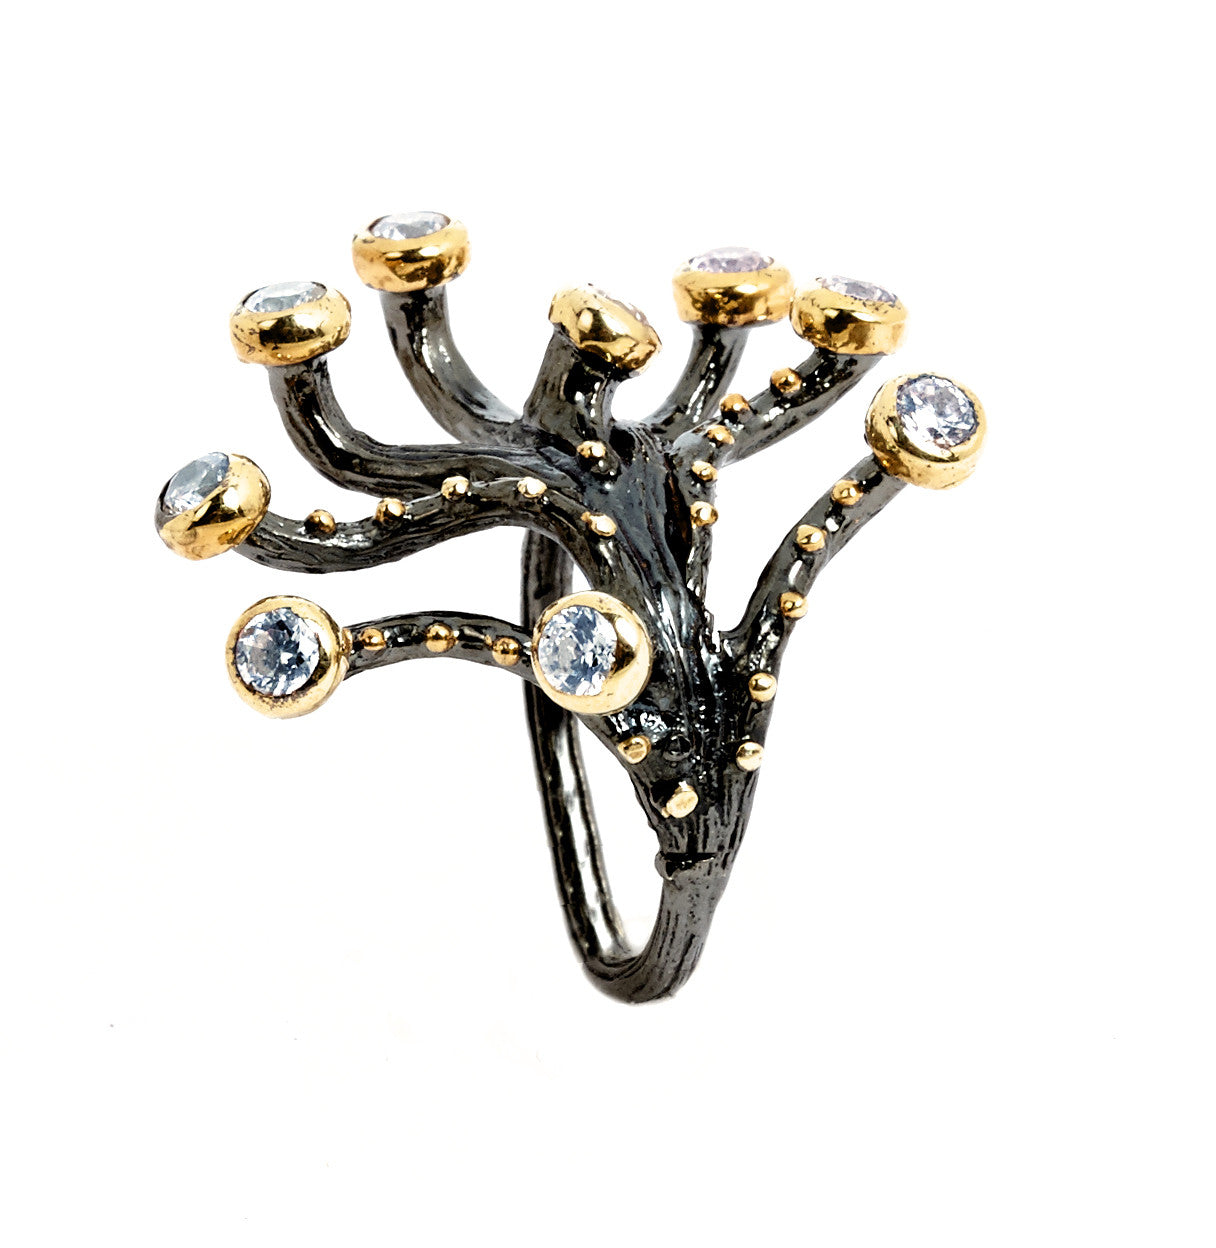 Stunning Sculptural Tree Branch Ring in Oxidated Sterling Silver with 14K Gold Plate CZ Buds Hollywood